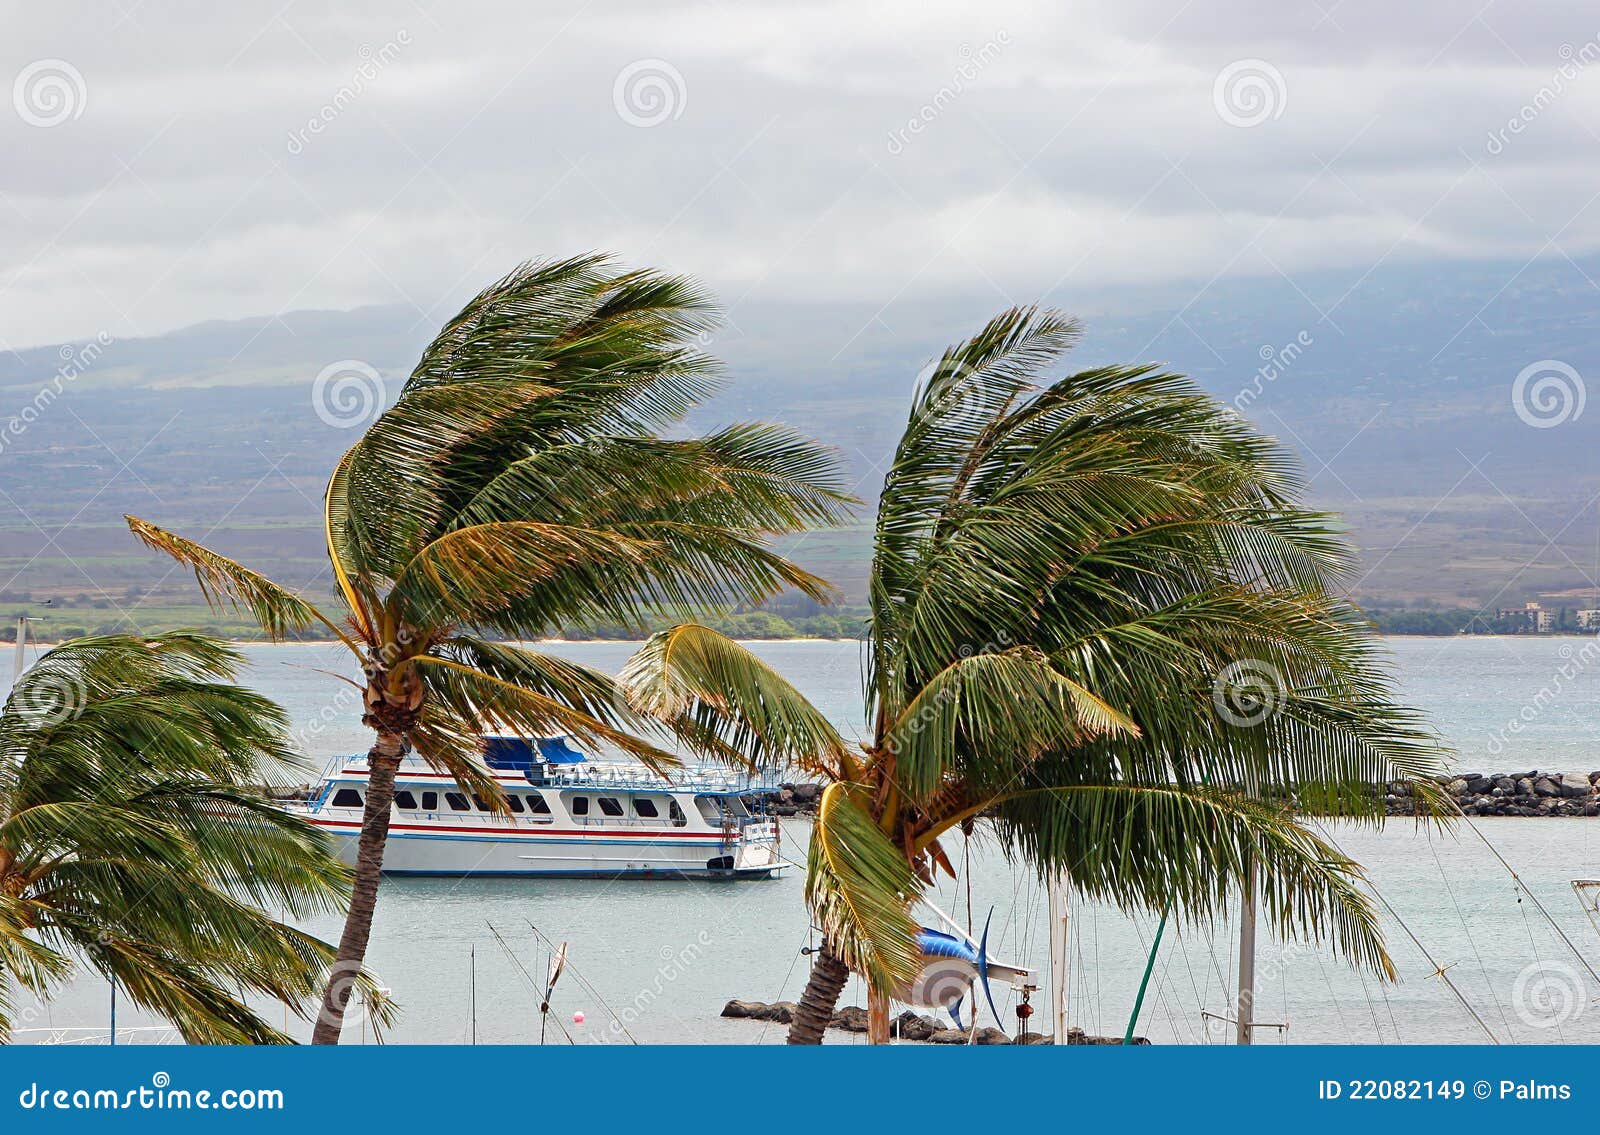 Tour Boat And Palm Trees Royalty Free Stock Images - Image ...